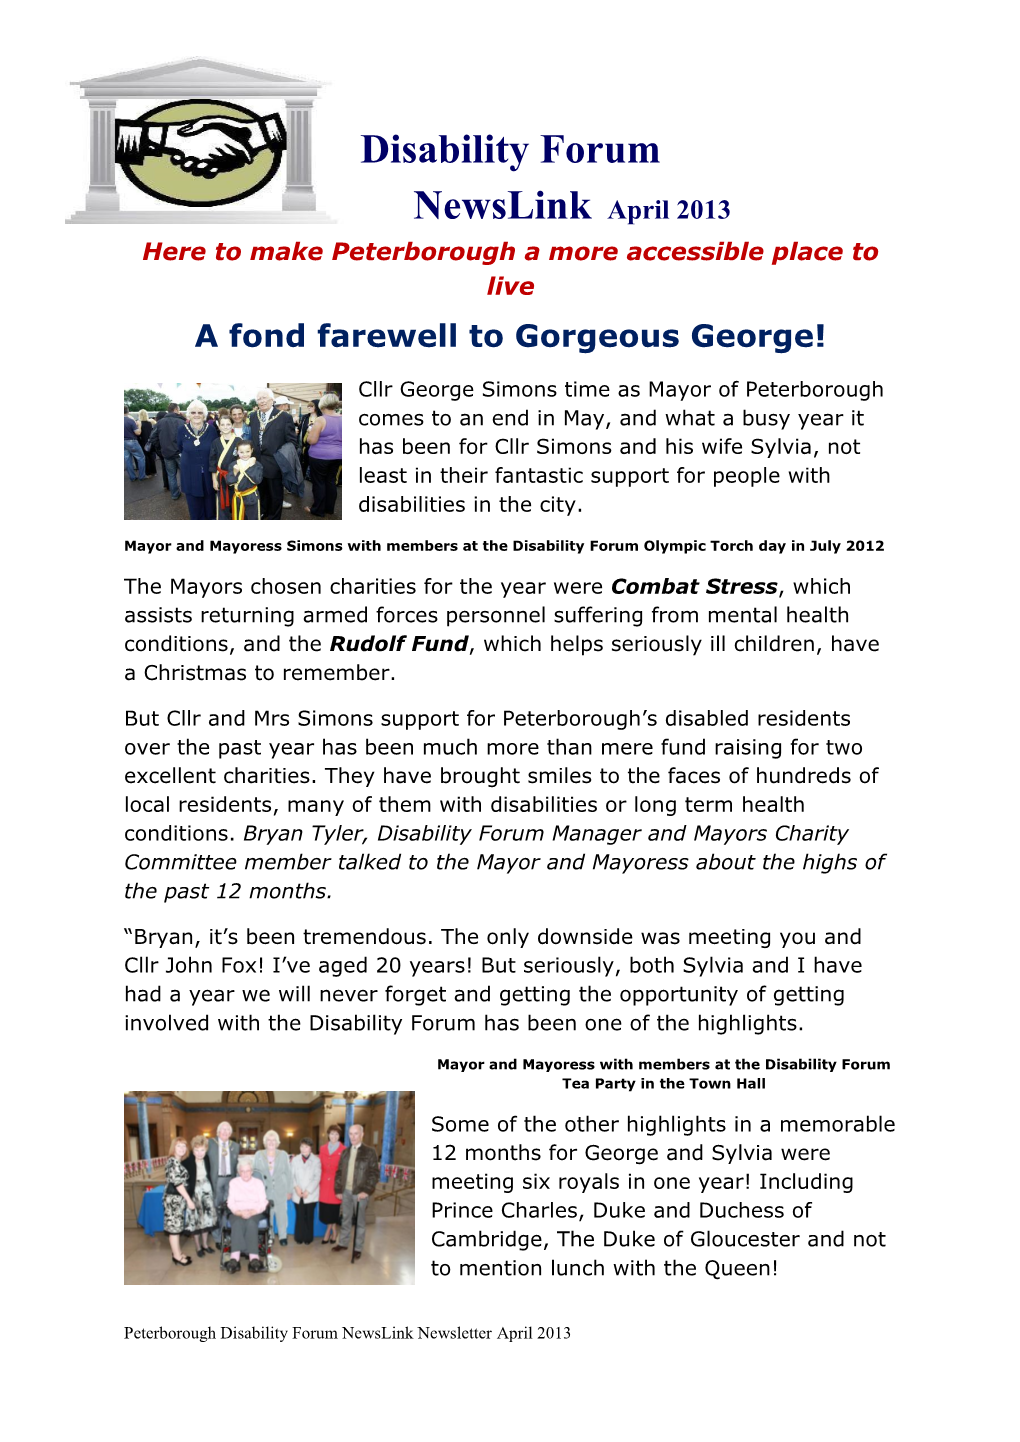 Disability Forum Newslink April 2013 Here to Make Peterborough a More Accessible Place to Live a Fond Farewell to Gorgeous George!